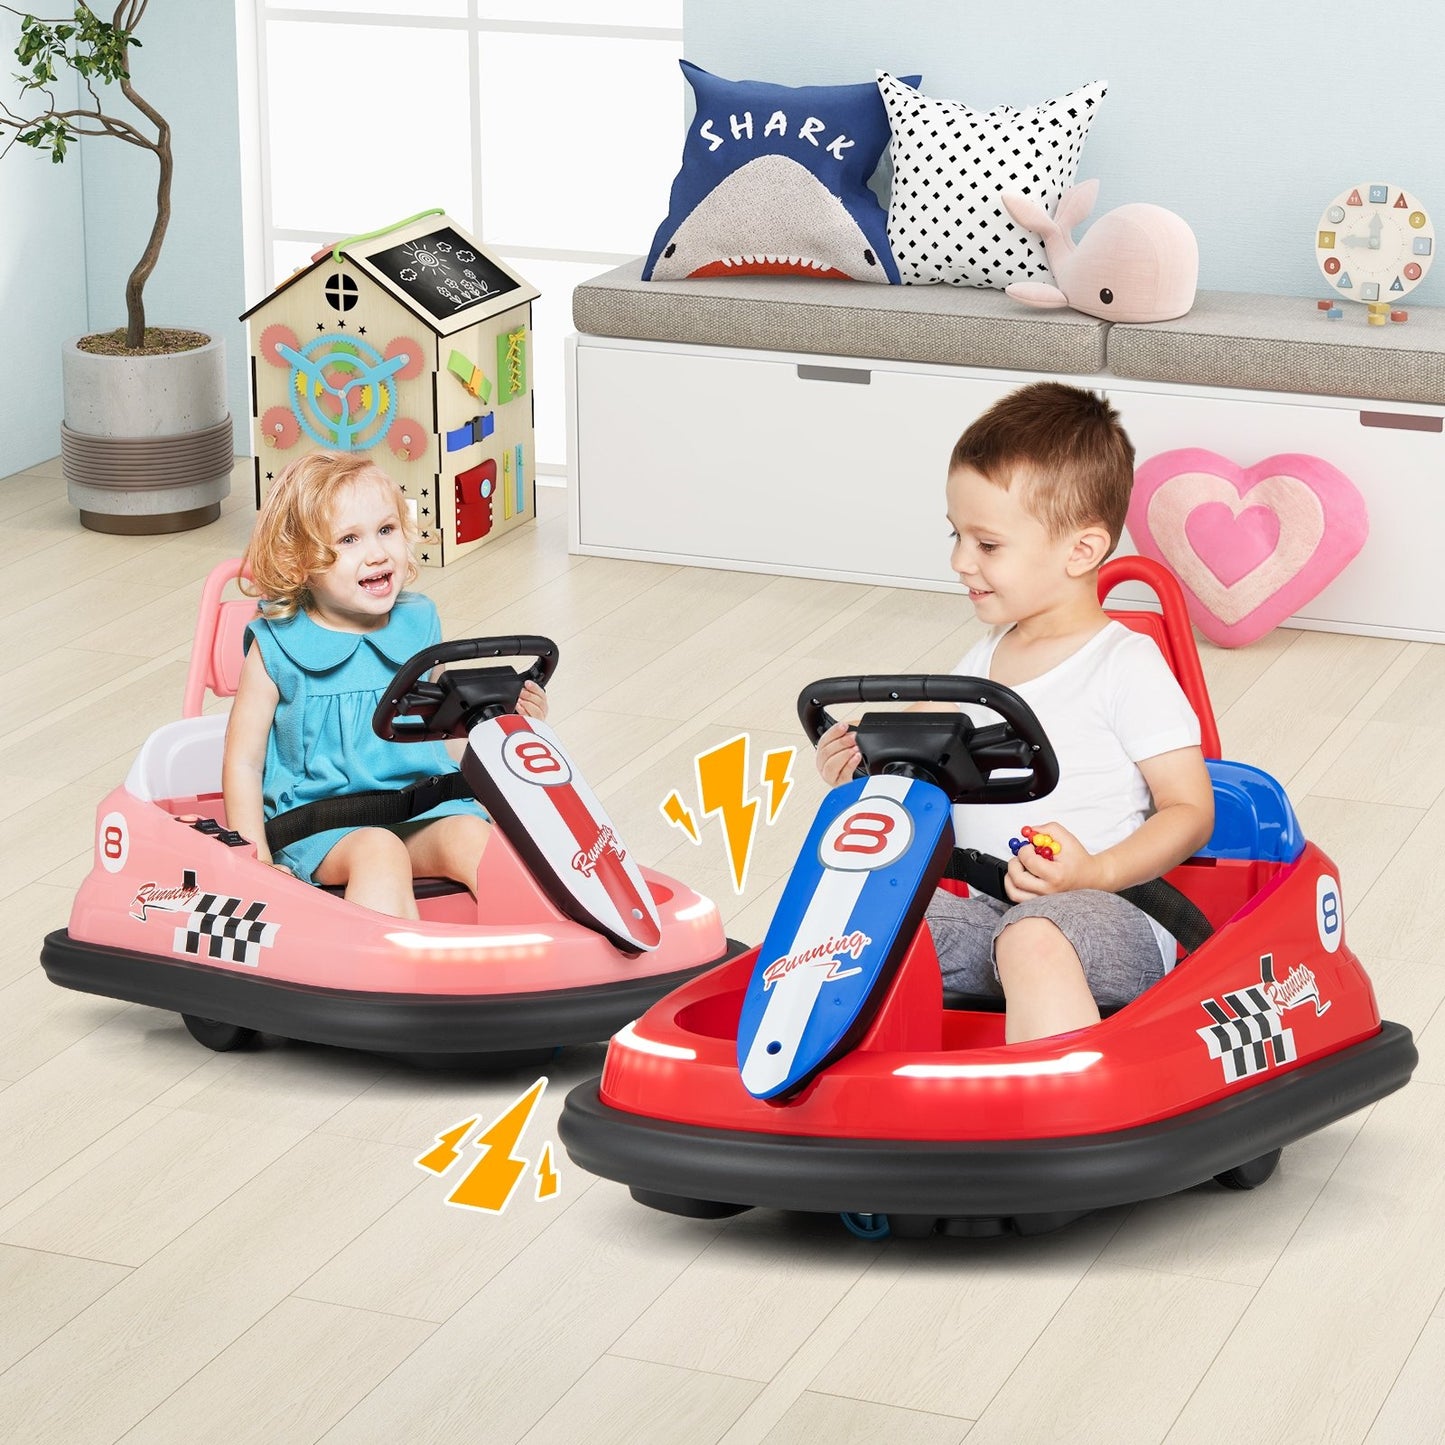 6V kids Ride-on Bumper Car with 360° Spinning and Dual Motors, Pink